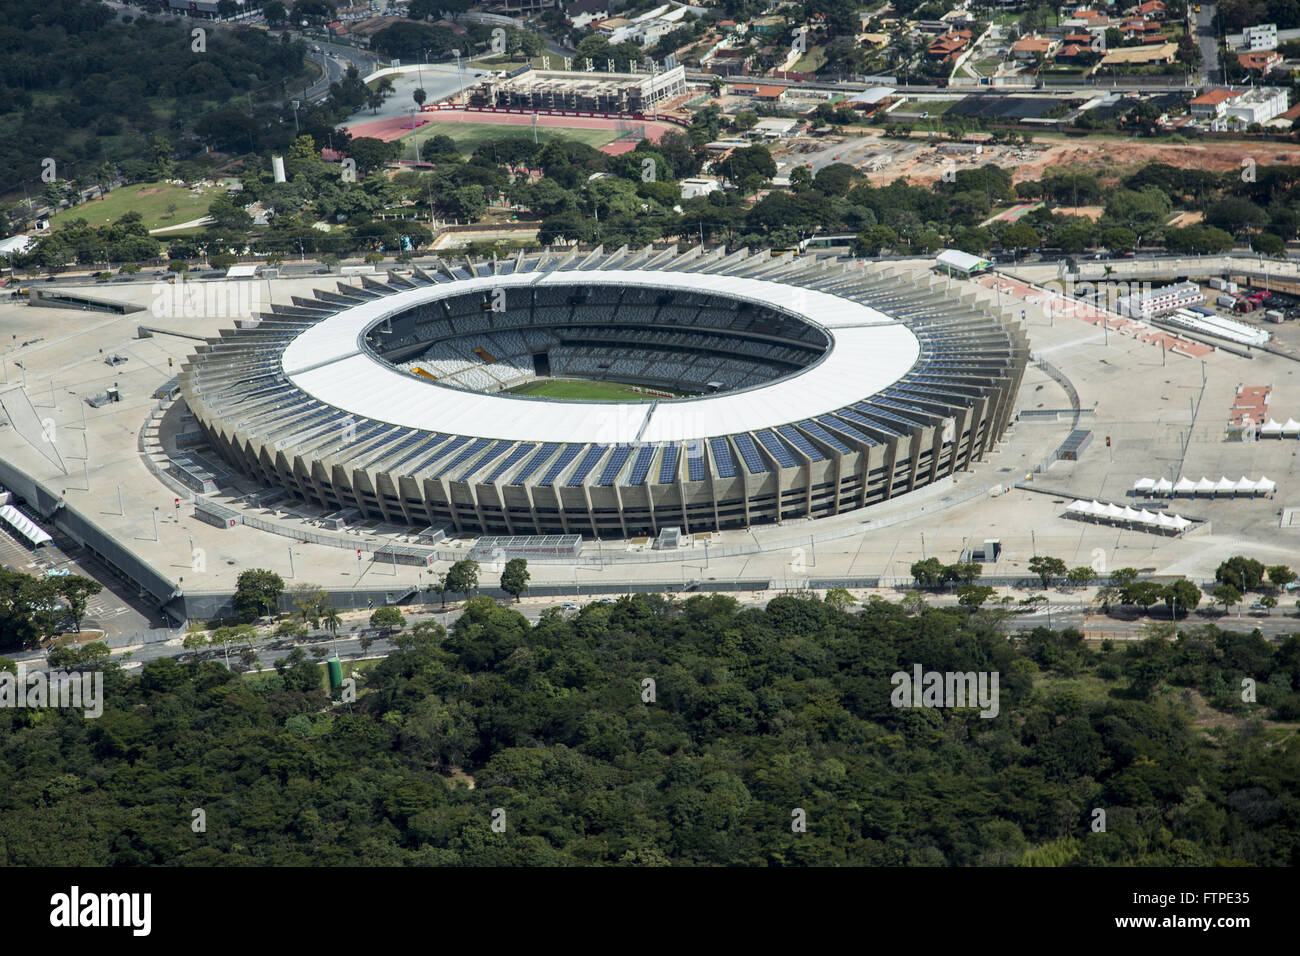 Aerial view of Estadio Governador Magalhaes Pinto - known as Mineirao - opened in 1965 Stock Photo